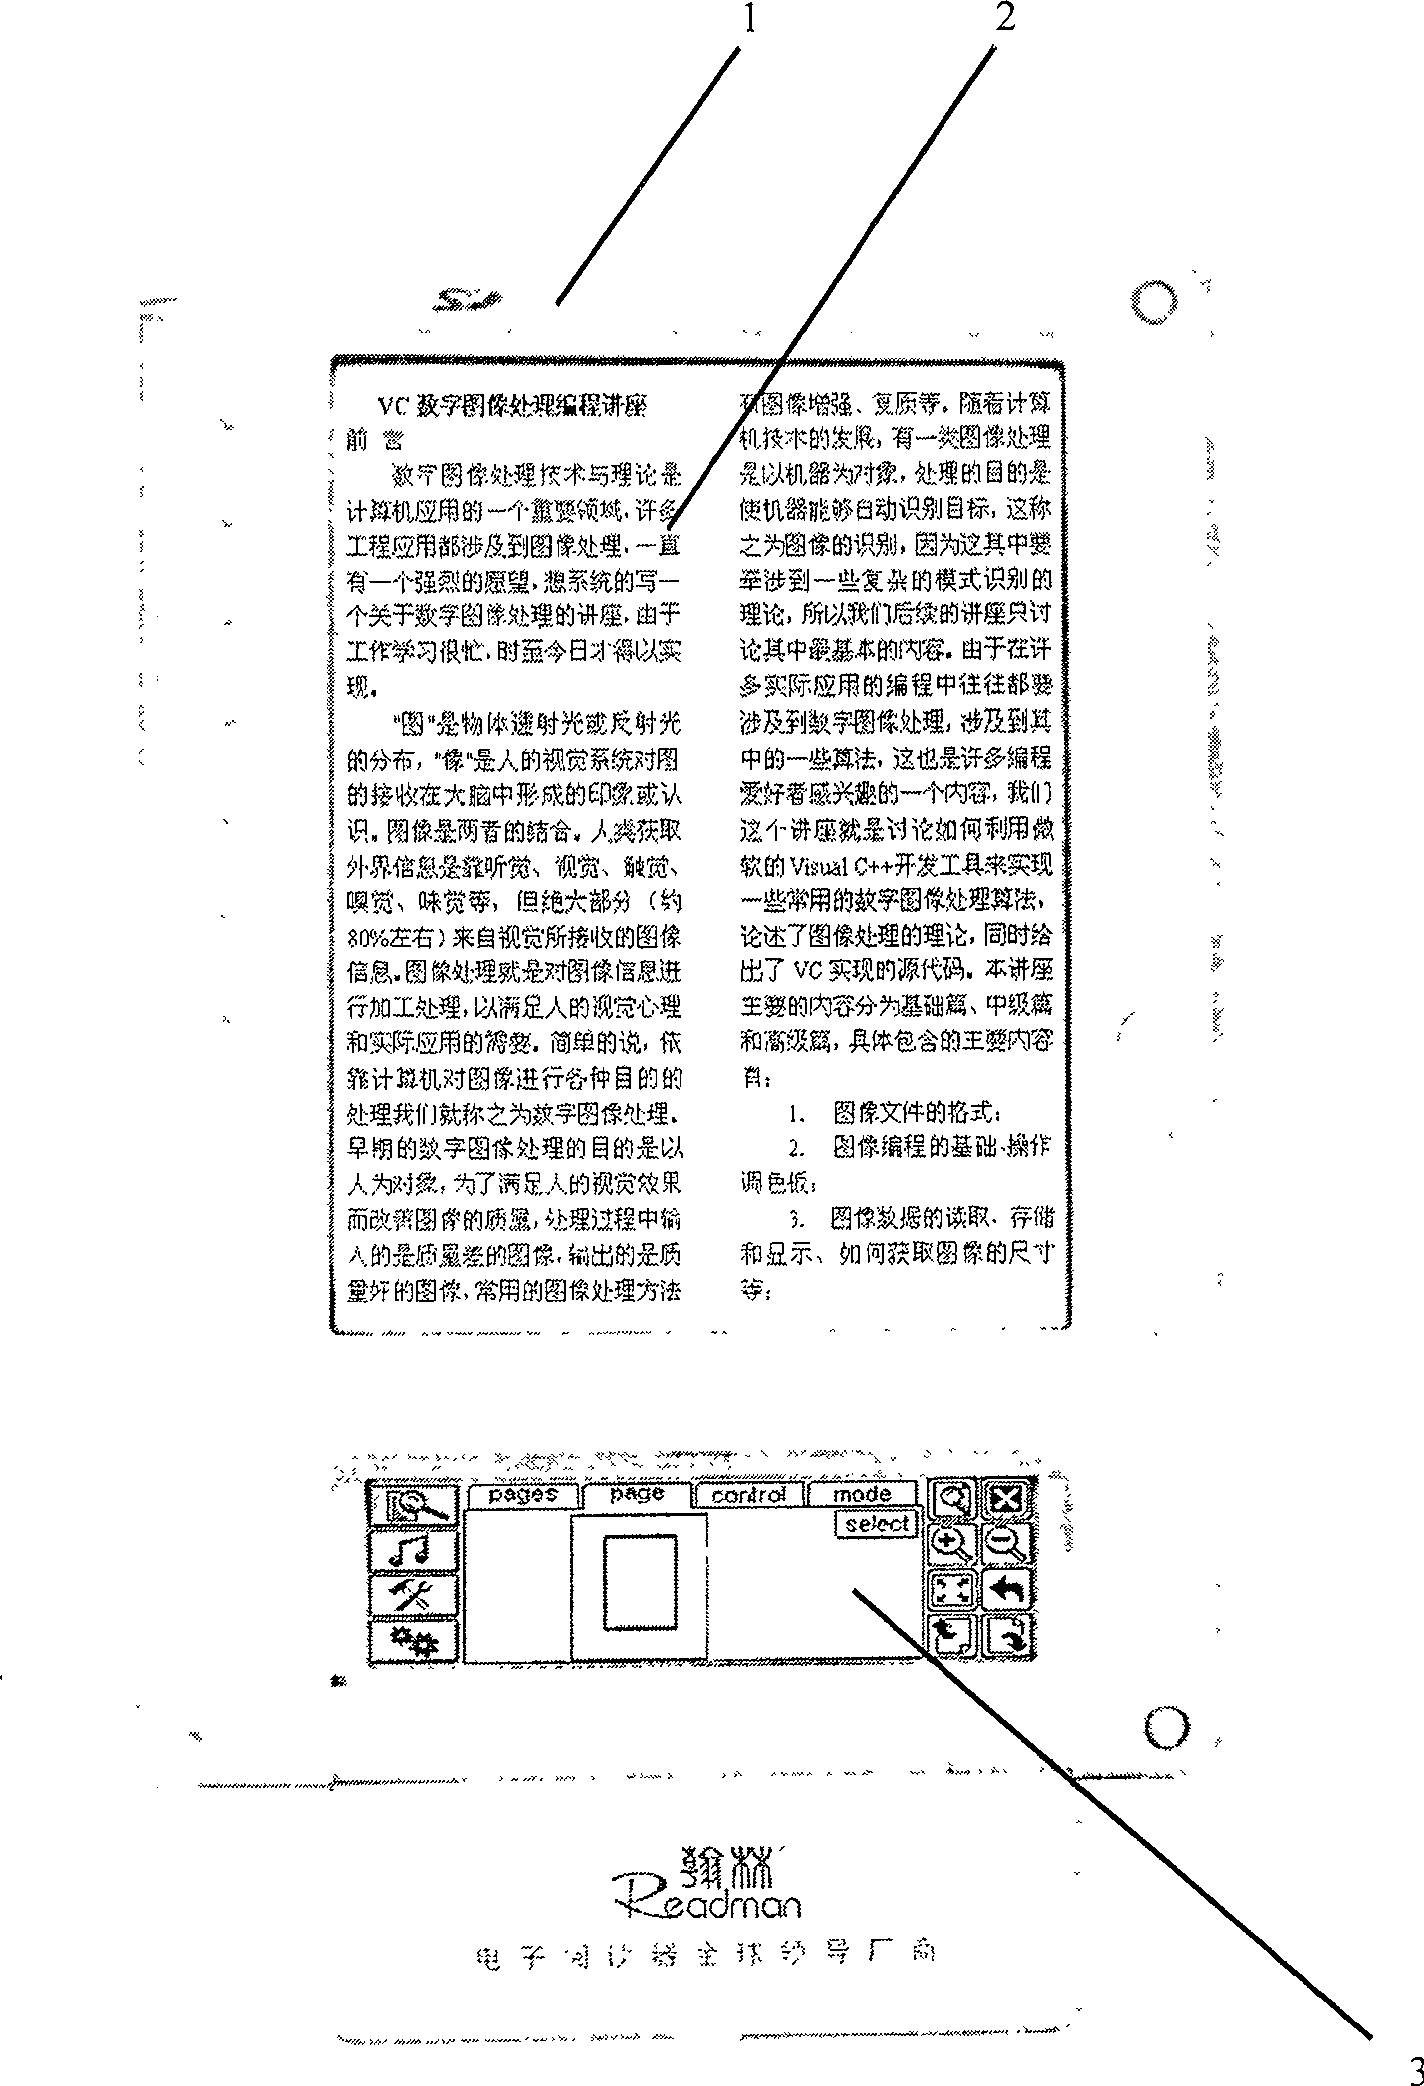 Display method for quickly focalizing page center on hand-held reading apparatus